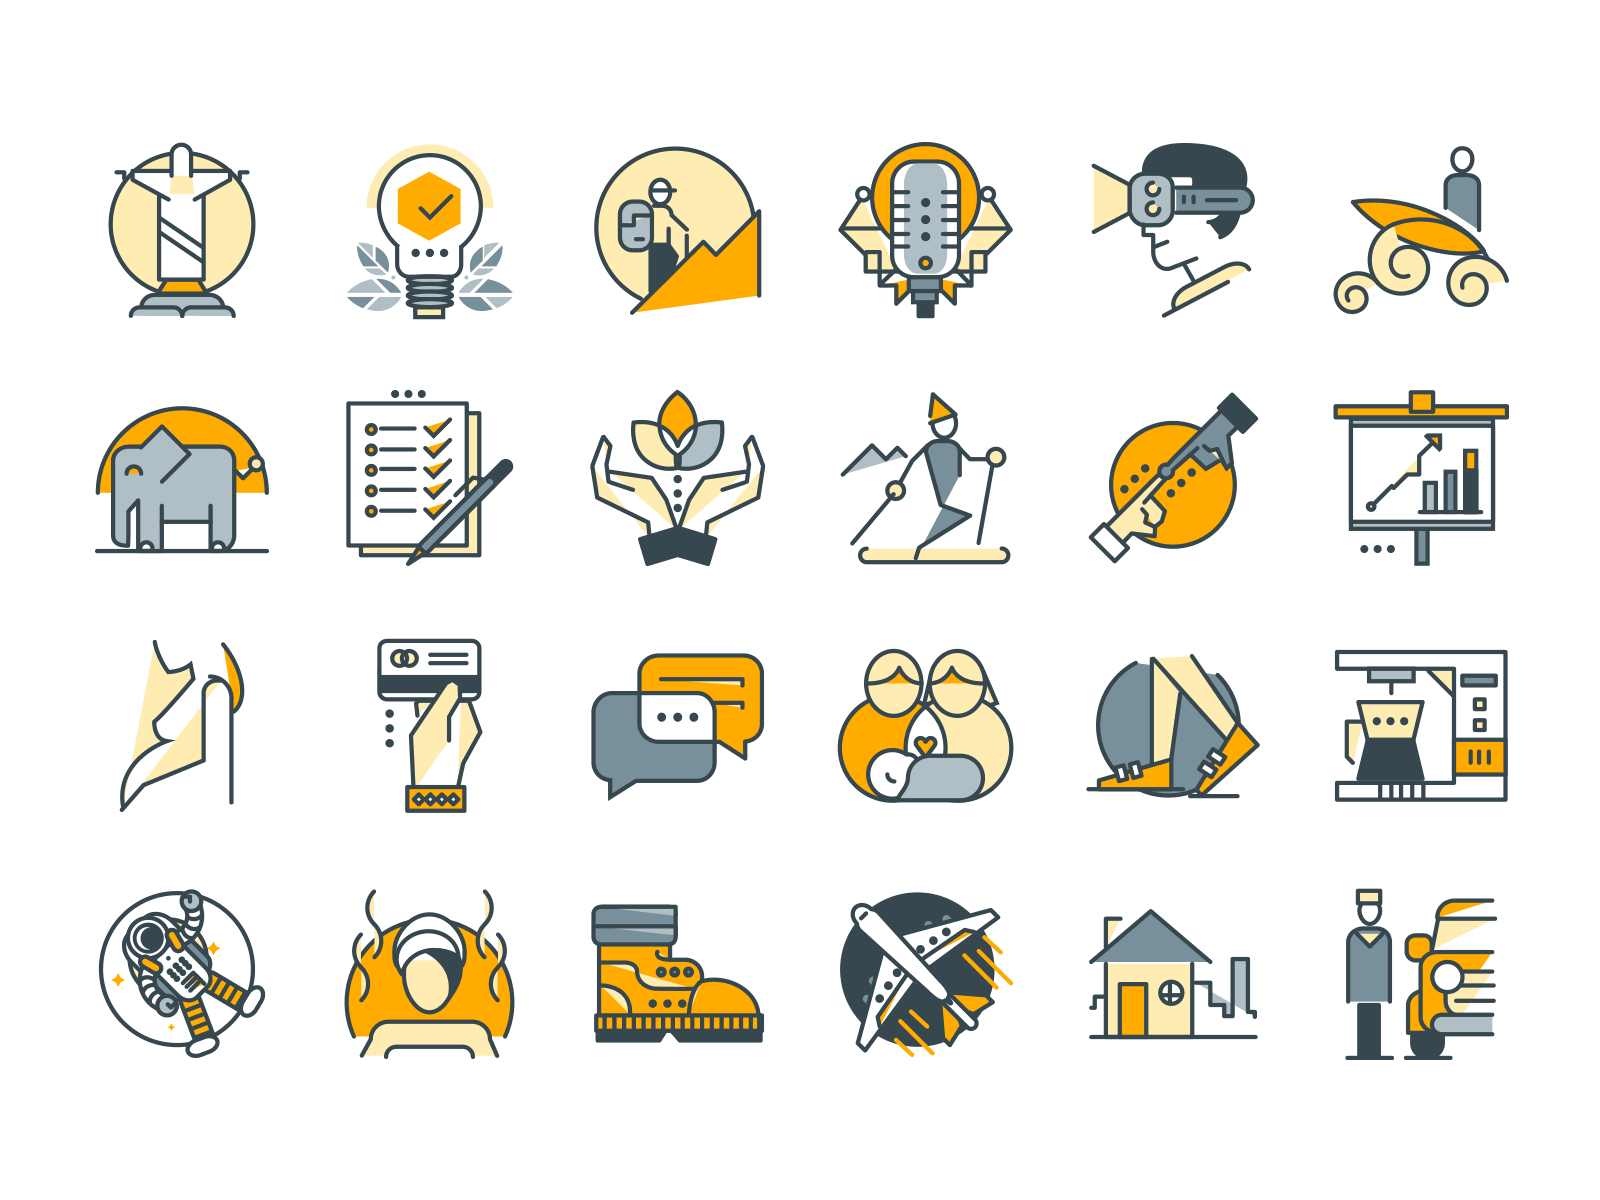 royalty free icons for commercial use no attribution